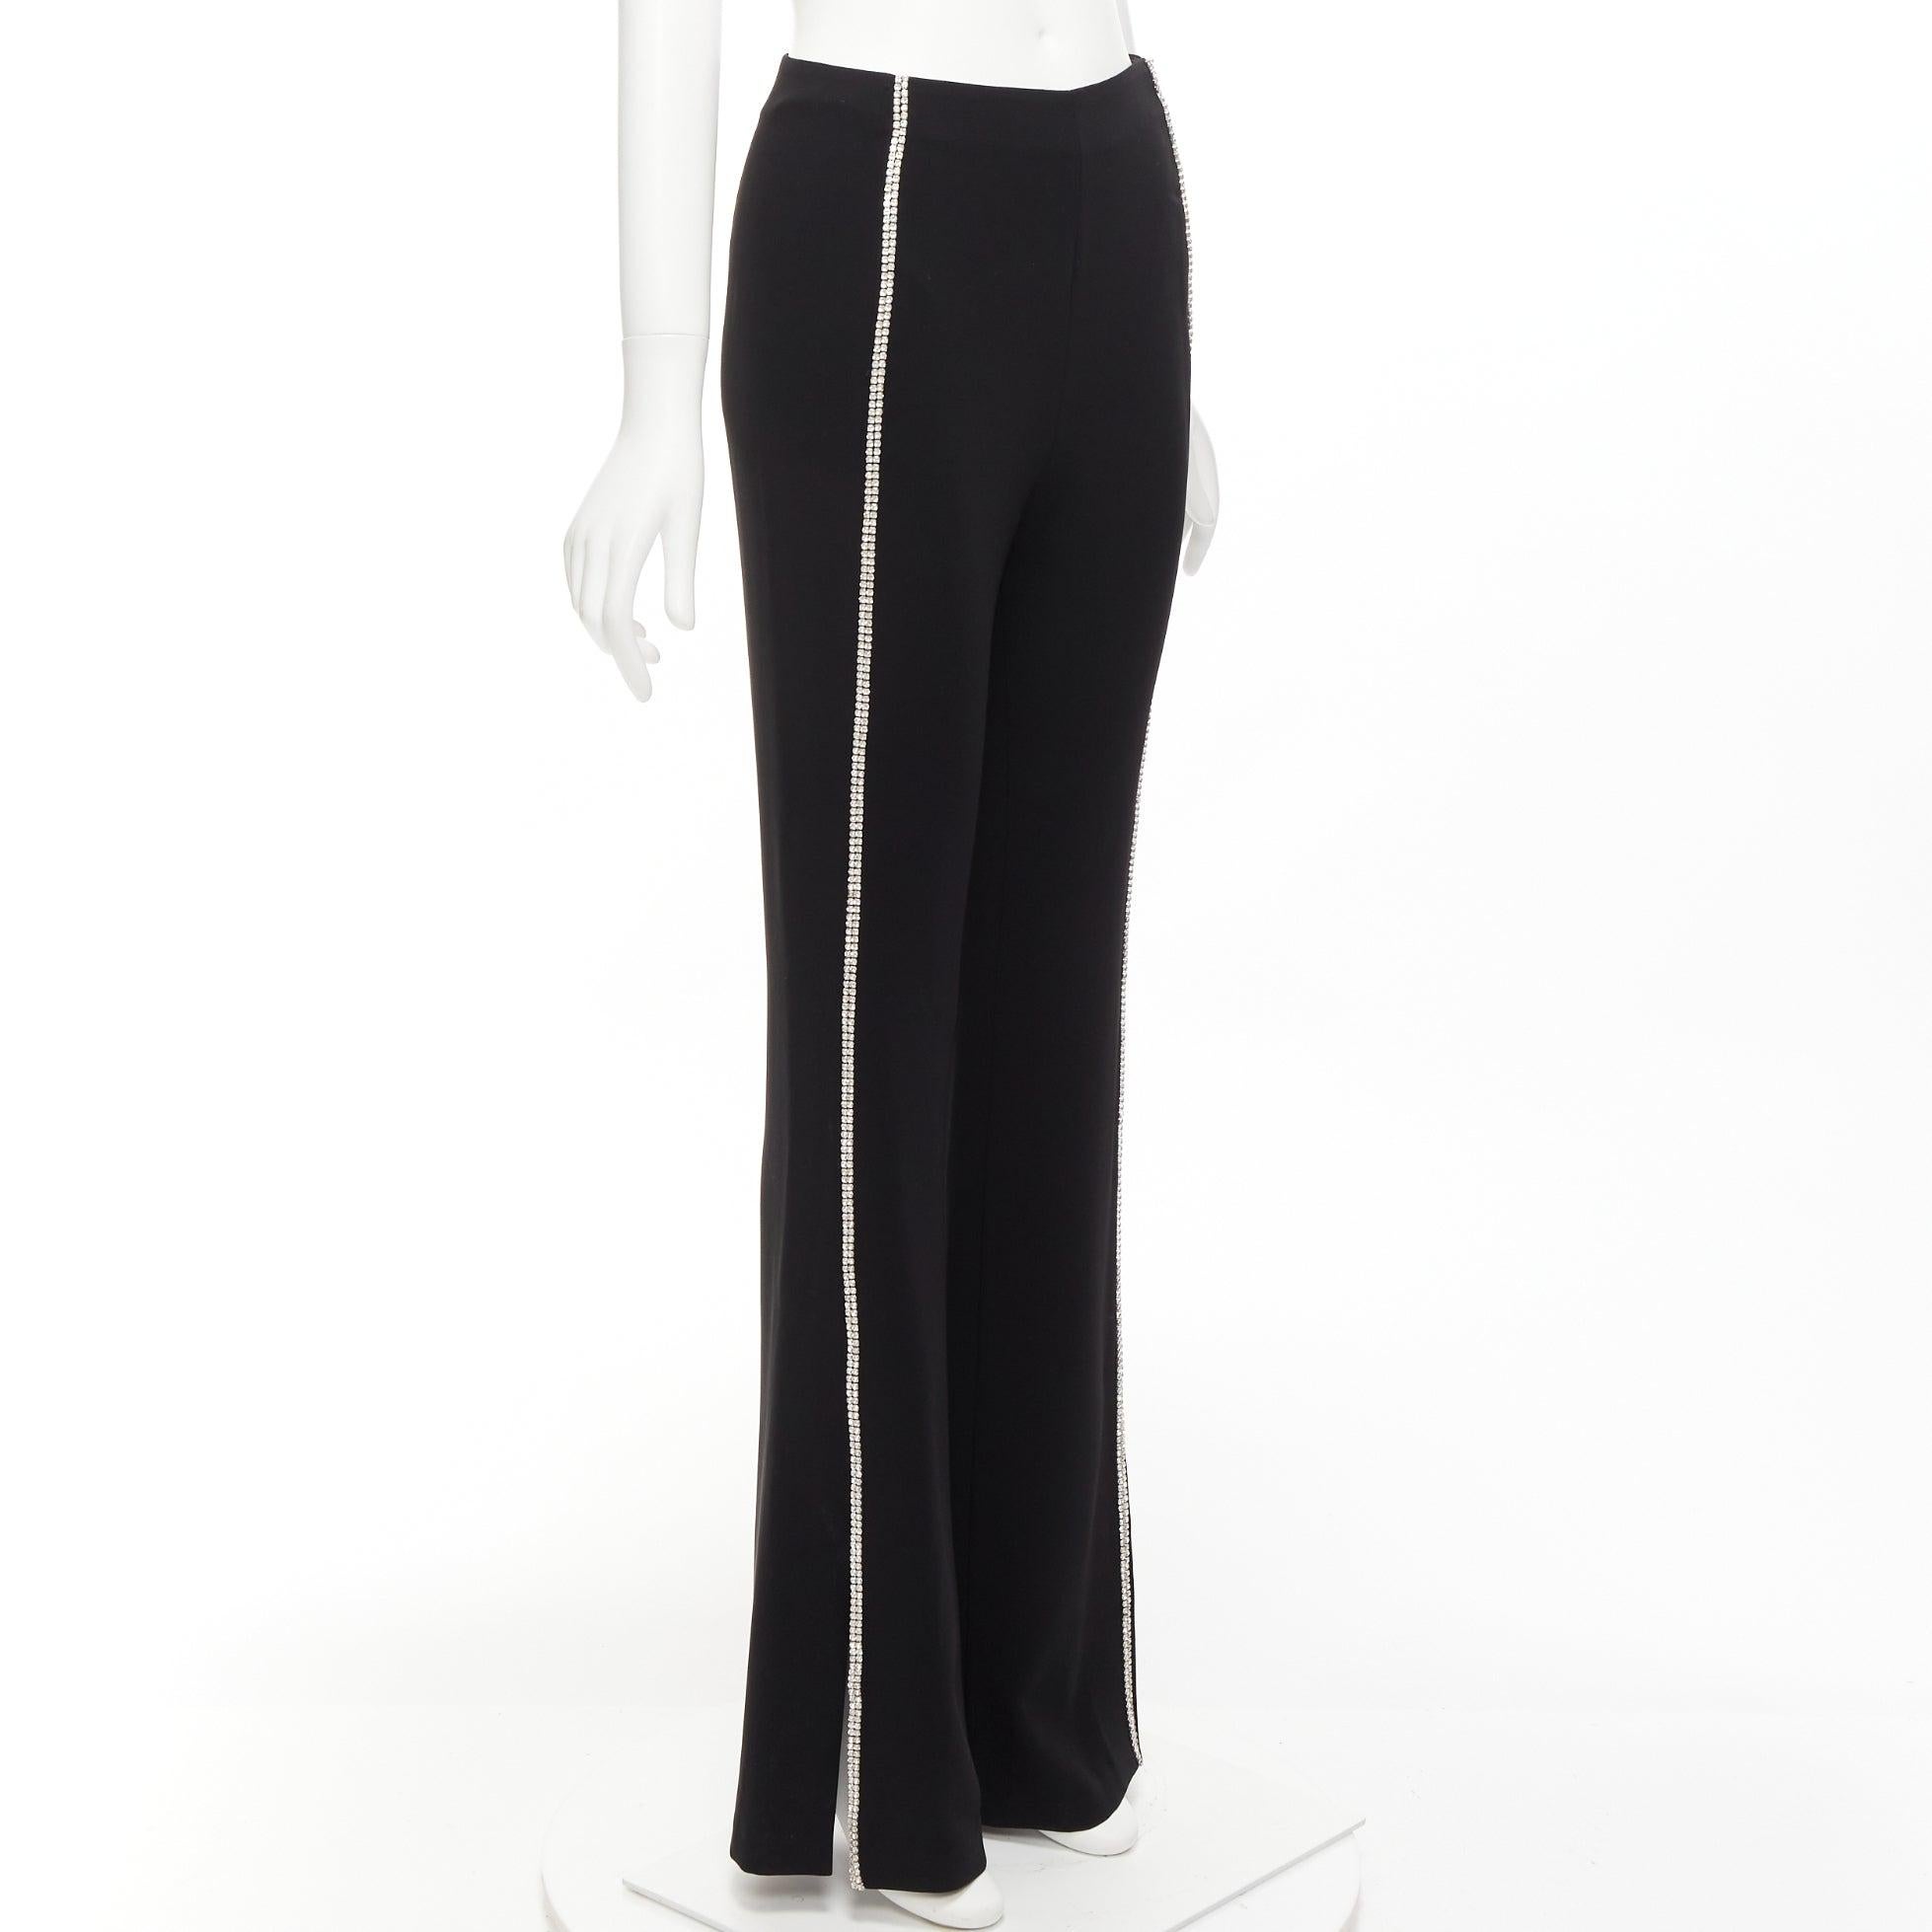 CINQ A SEPT clear strass crystal trim black high waisted flare slit pants US0 XS
Reference: AAWC/A00979
Brand: Cinq a Sept
Material: Triacetate, Blend
Color: Black, Clear
Pattern: Crystals
Closure: Zip
Extra Details: Side zip.
Made in: